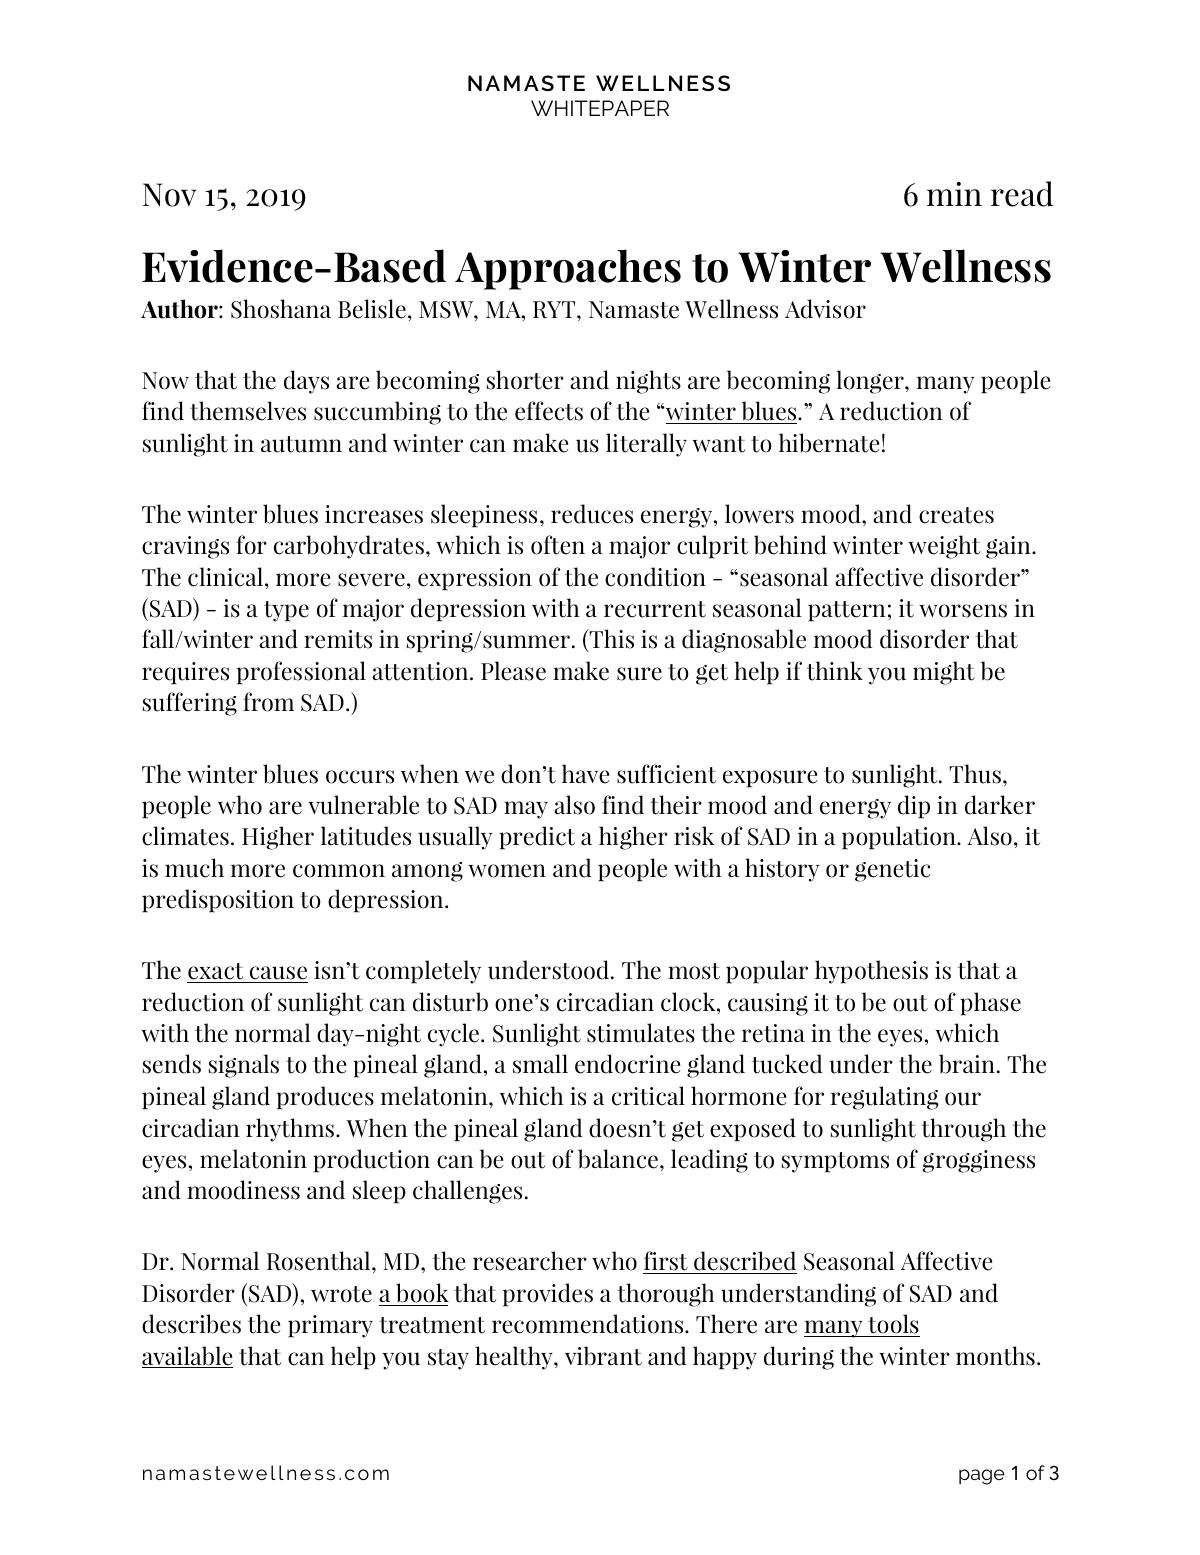 Evidence-Based Approaches to Winter Wellness